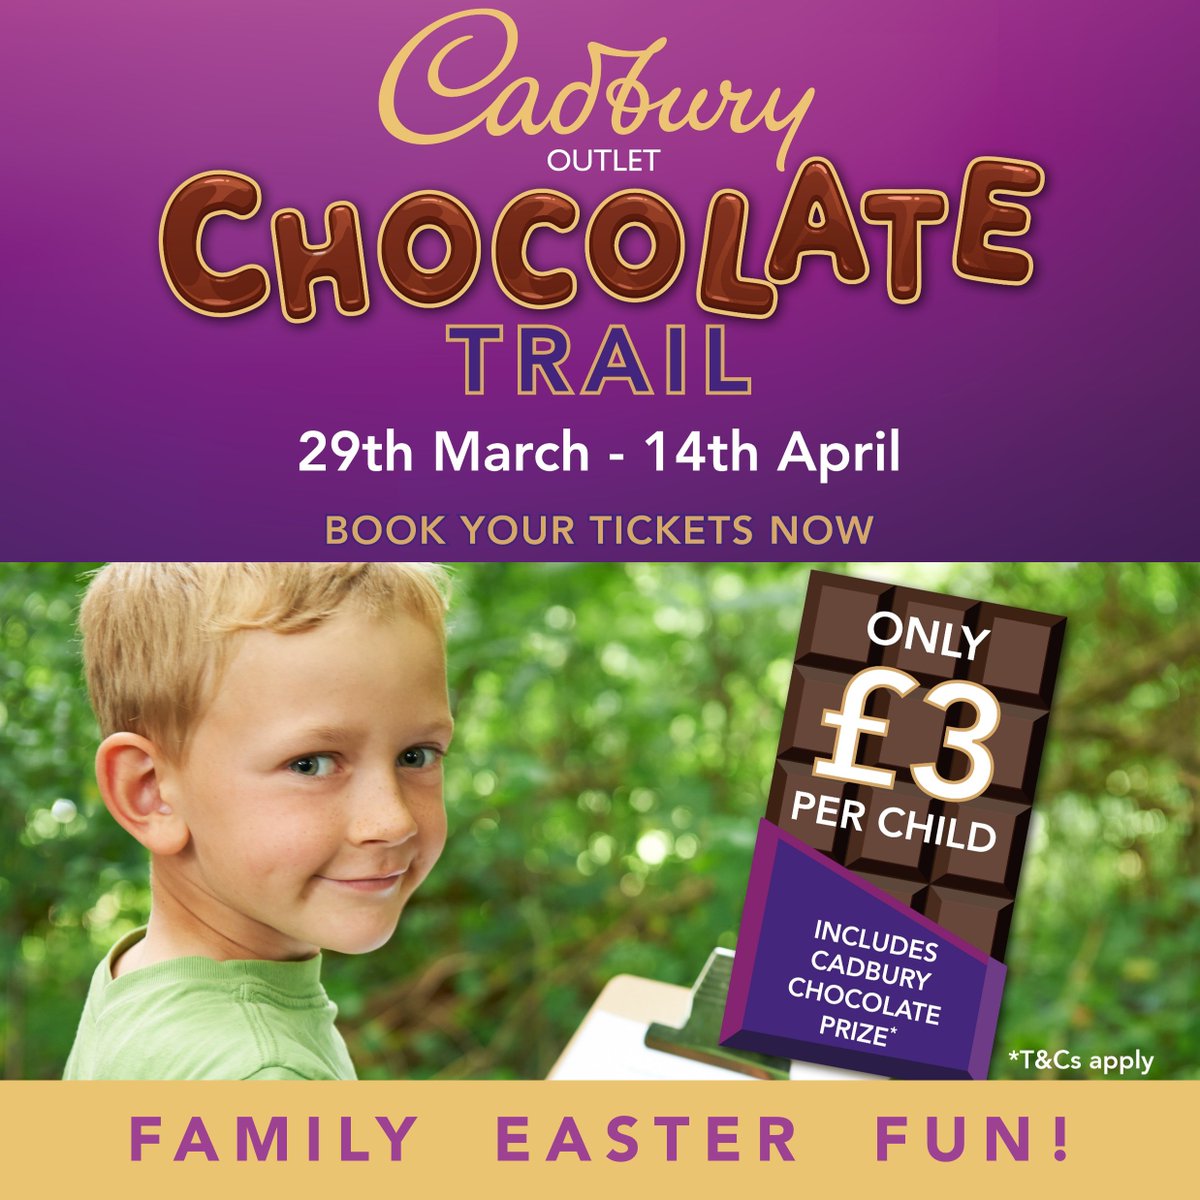 The CADBURY OUTLET EASTER CHOCOLATE TRAIL is now on! Tickets just £3 per child, throughout the Easter school holiday.🍫 More details: springfieldsoutlet.co.uk/events/